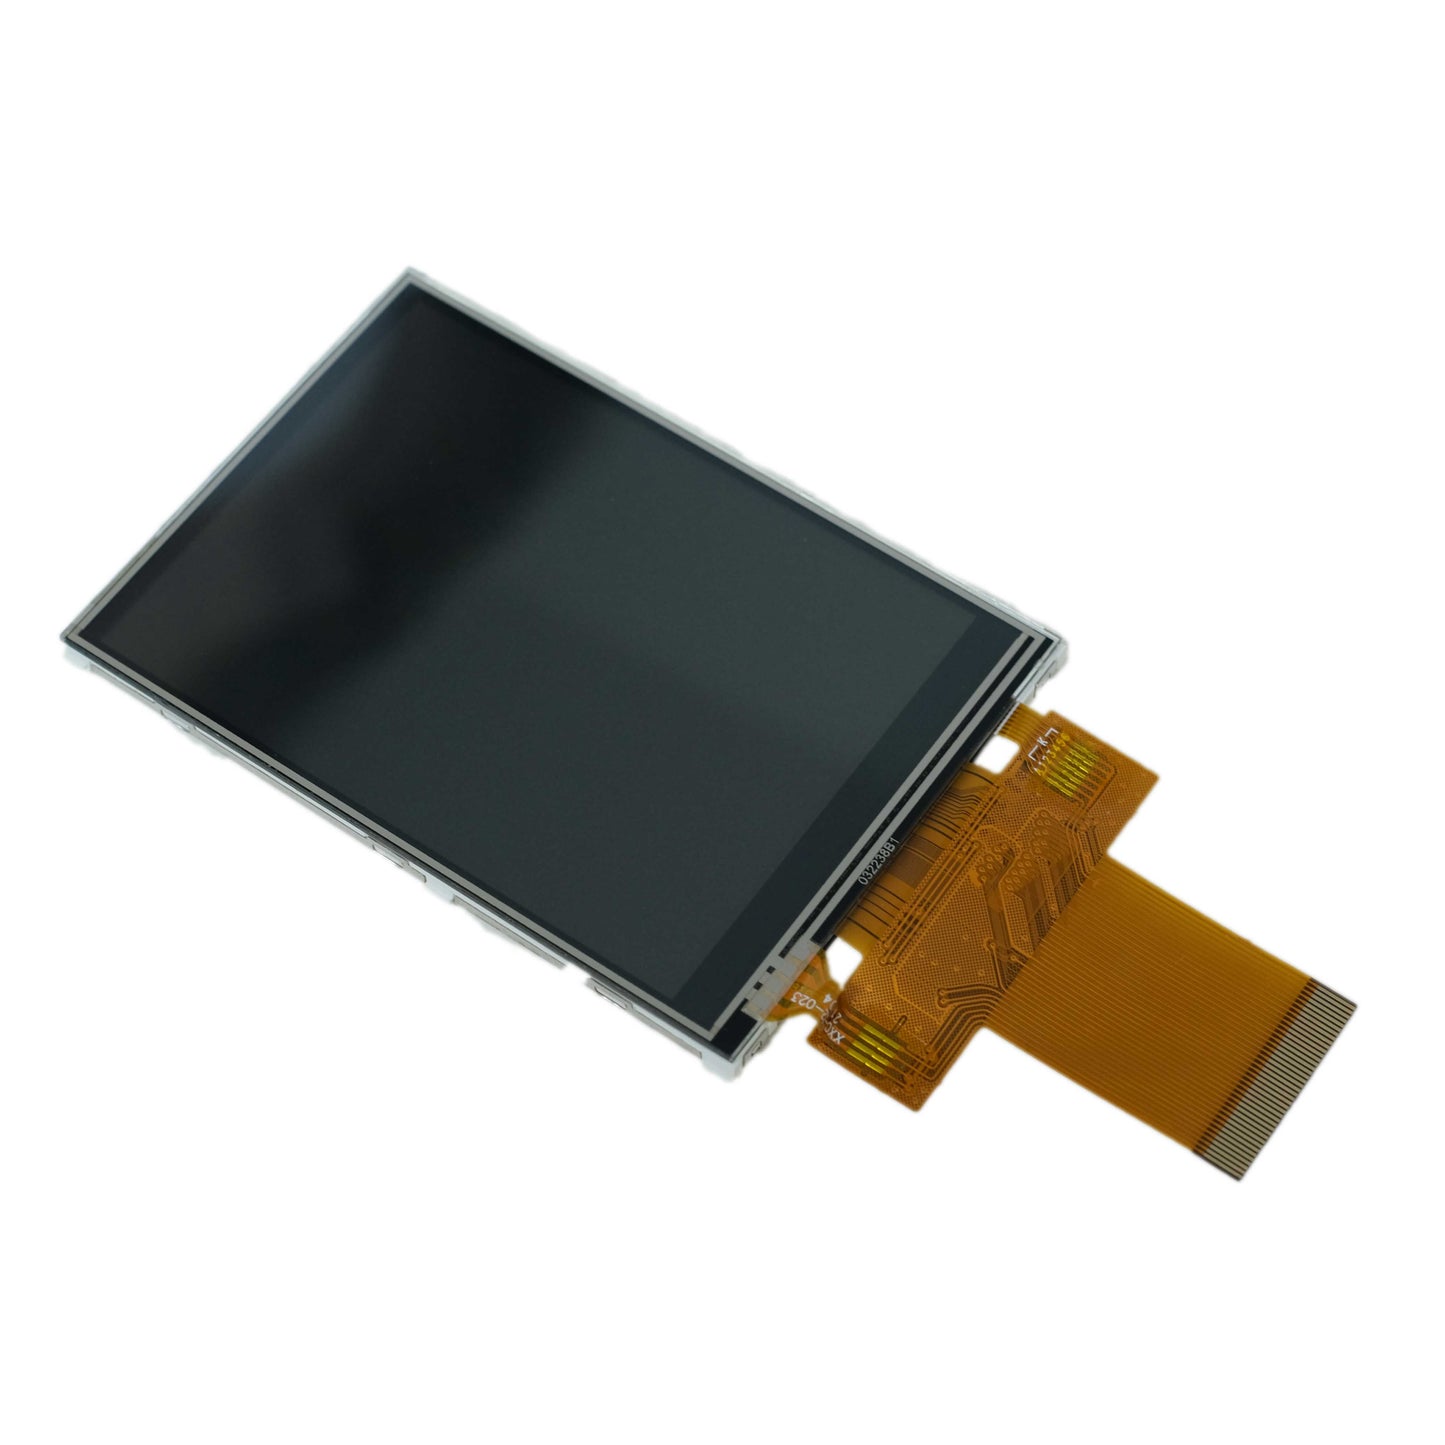 top view of 3.2-inch 240x320 TFT display panel with SPI interface